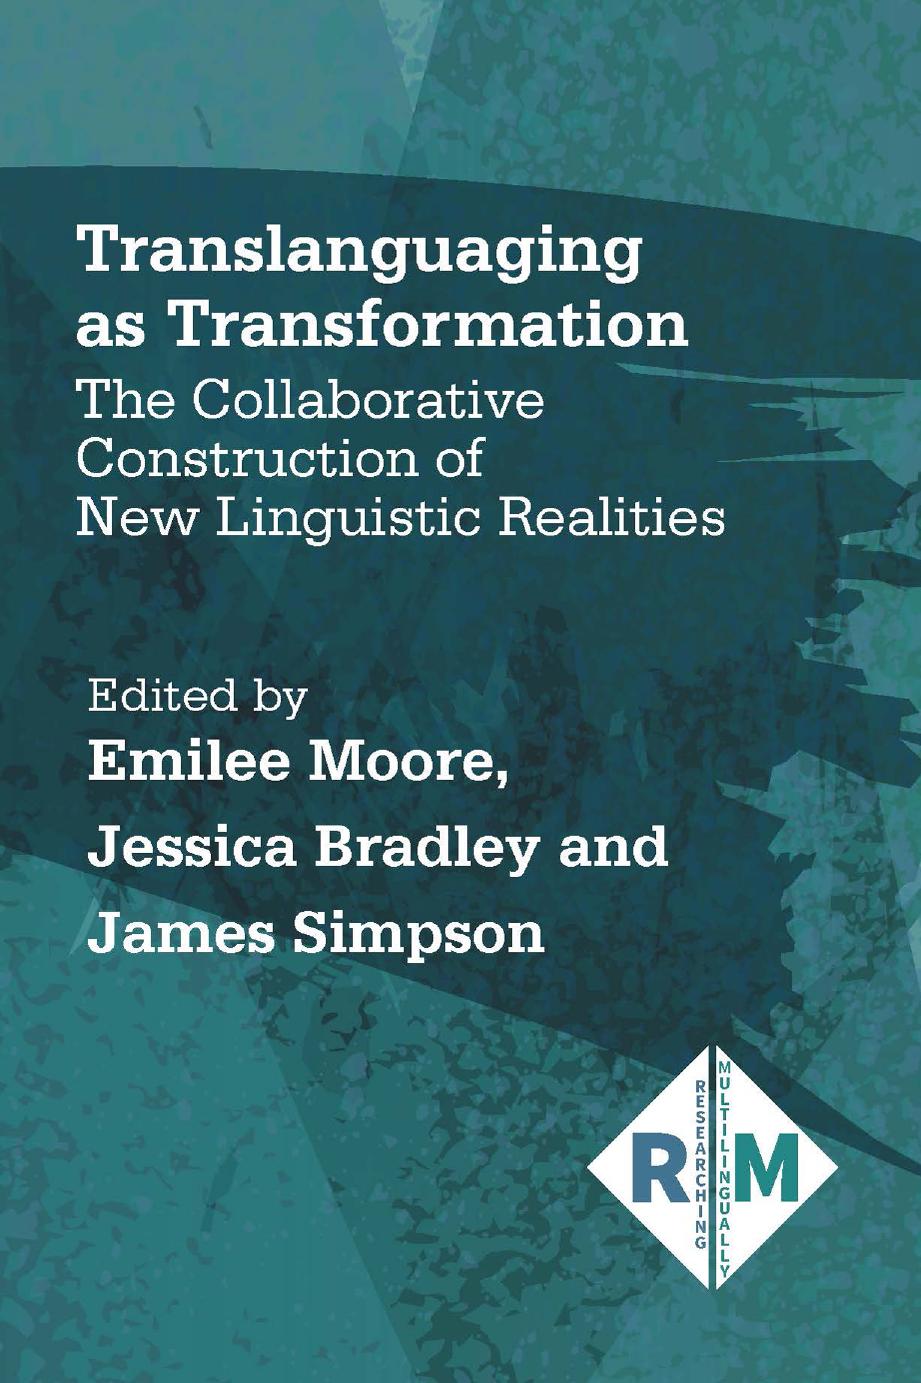 Translanguaging as Transformation: The Collaborative Construction of New Linguistic Realities